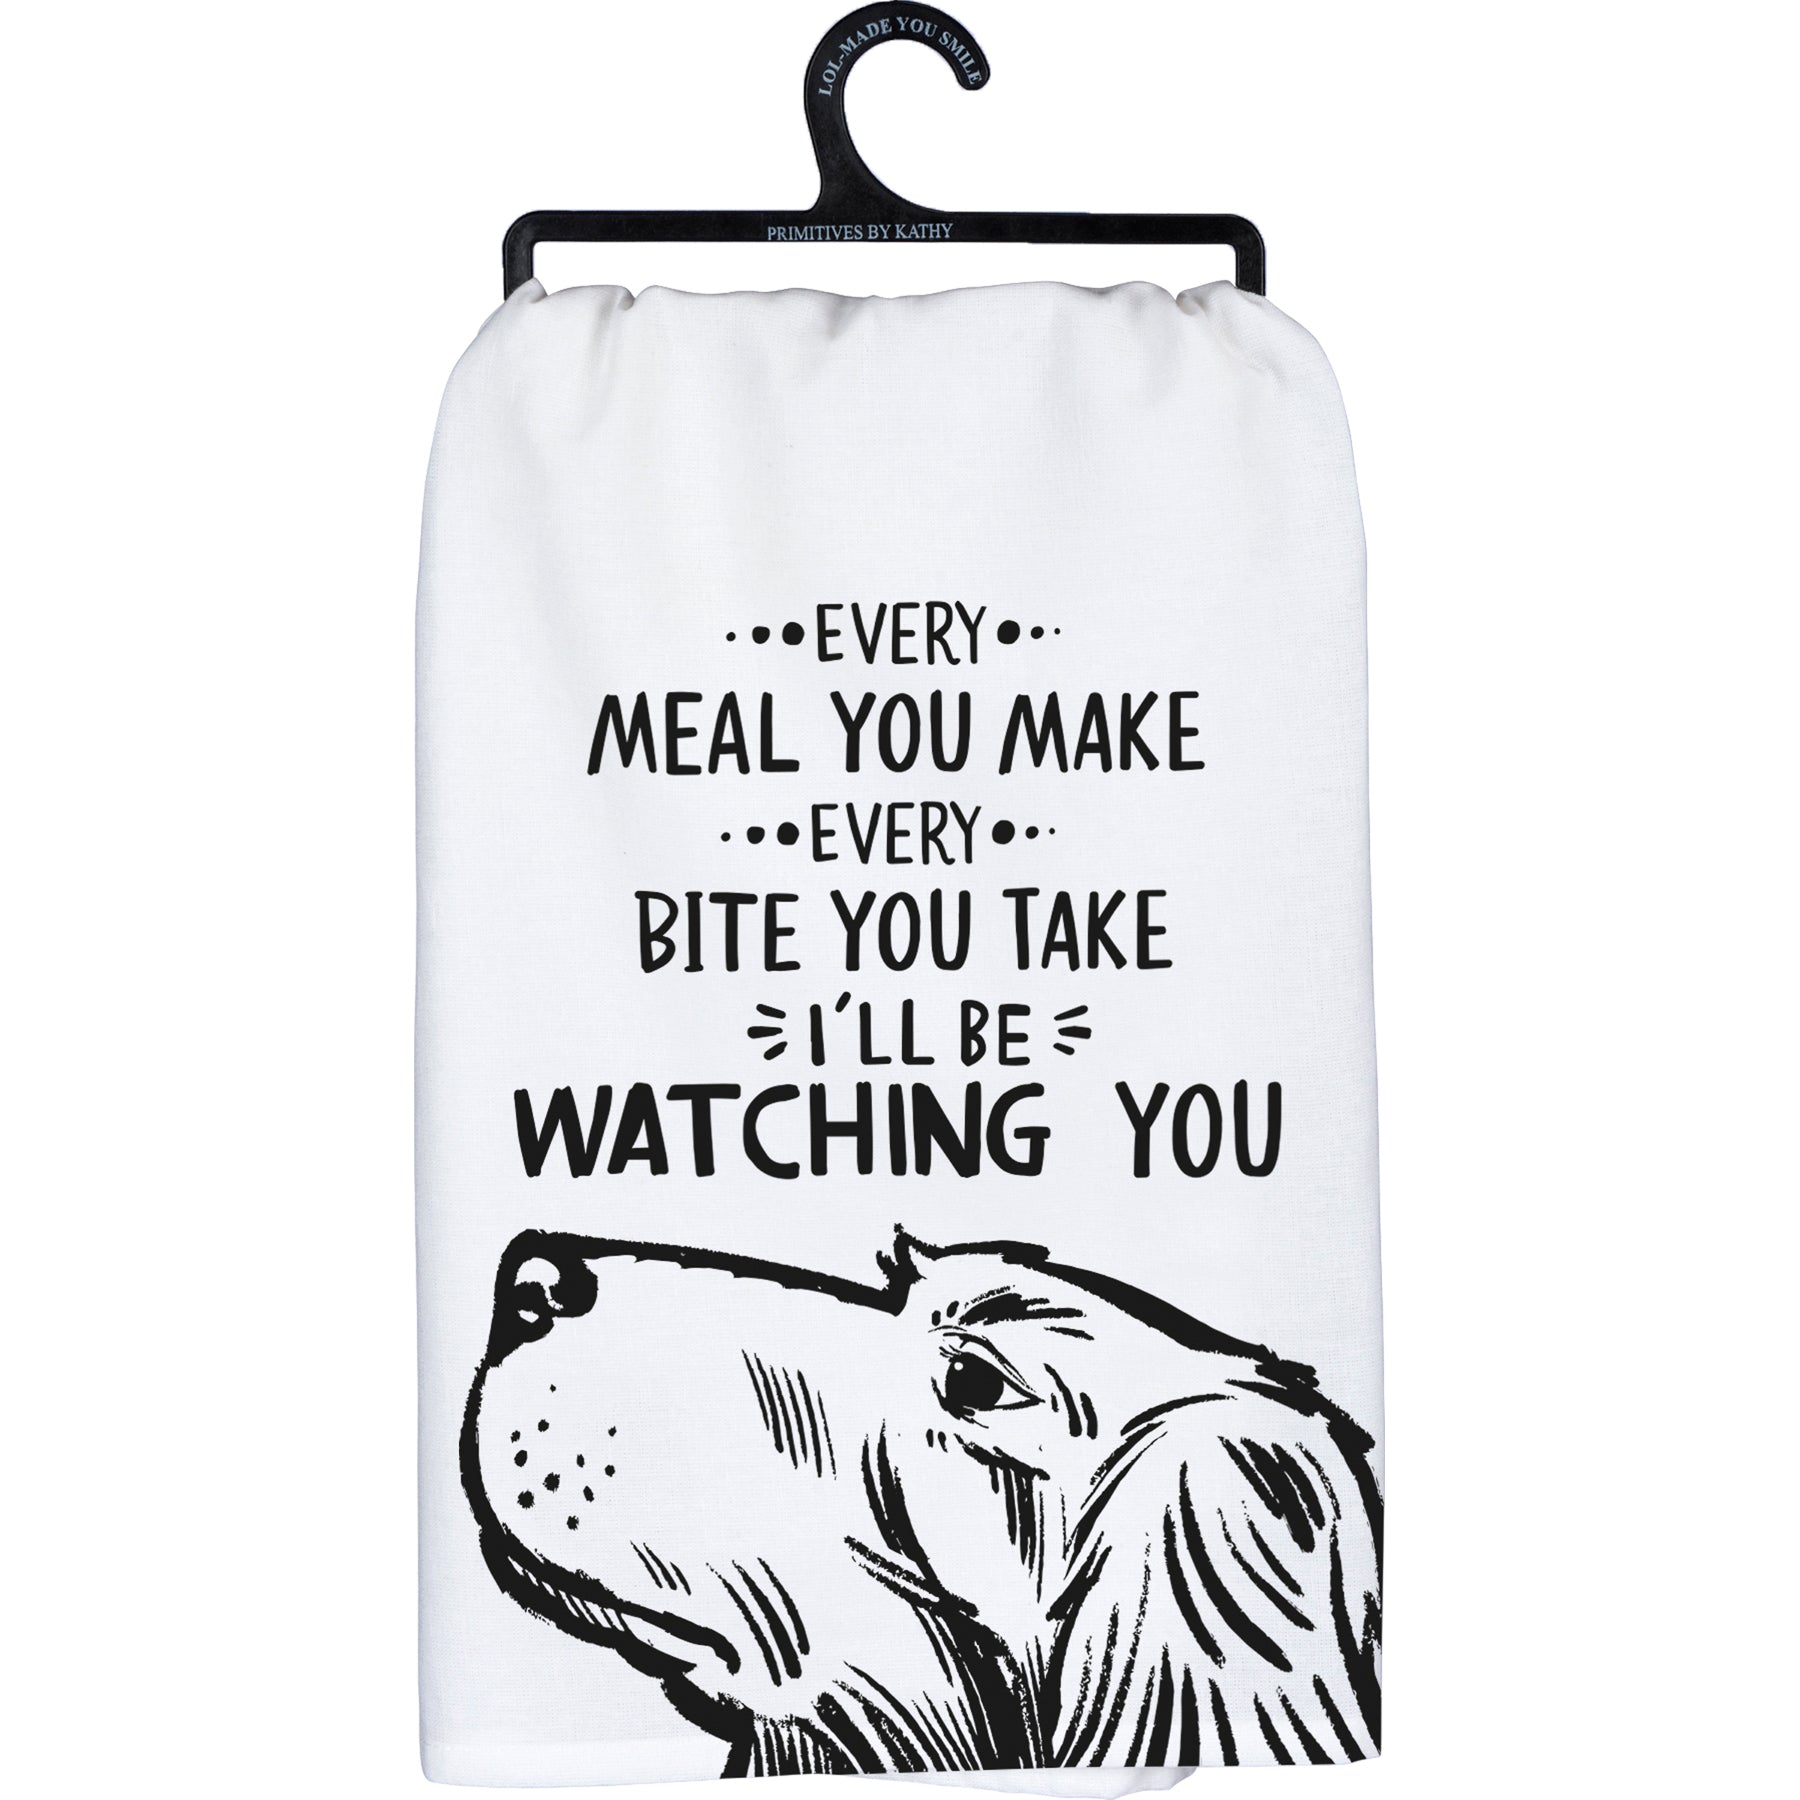 Every meal you make every bite you take I'll be watching you  cotton kitchen towel with dog design.